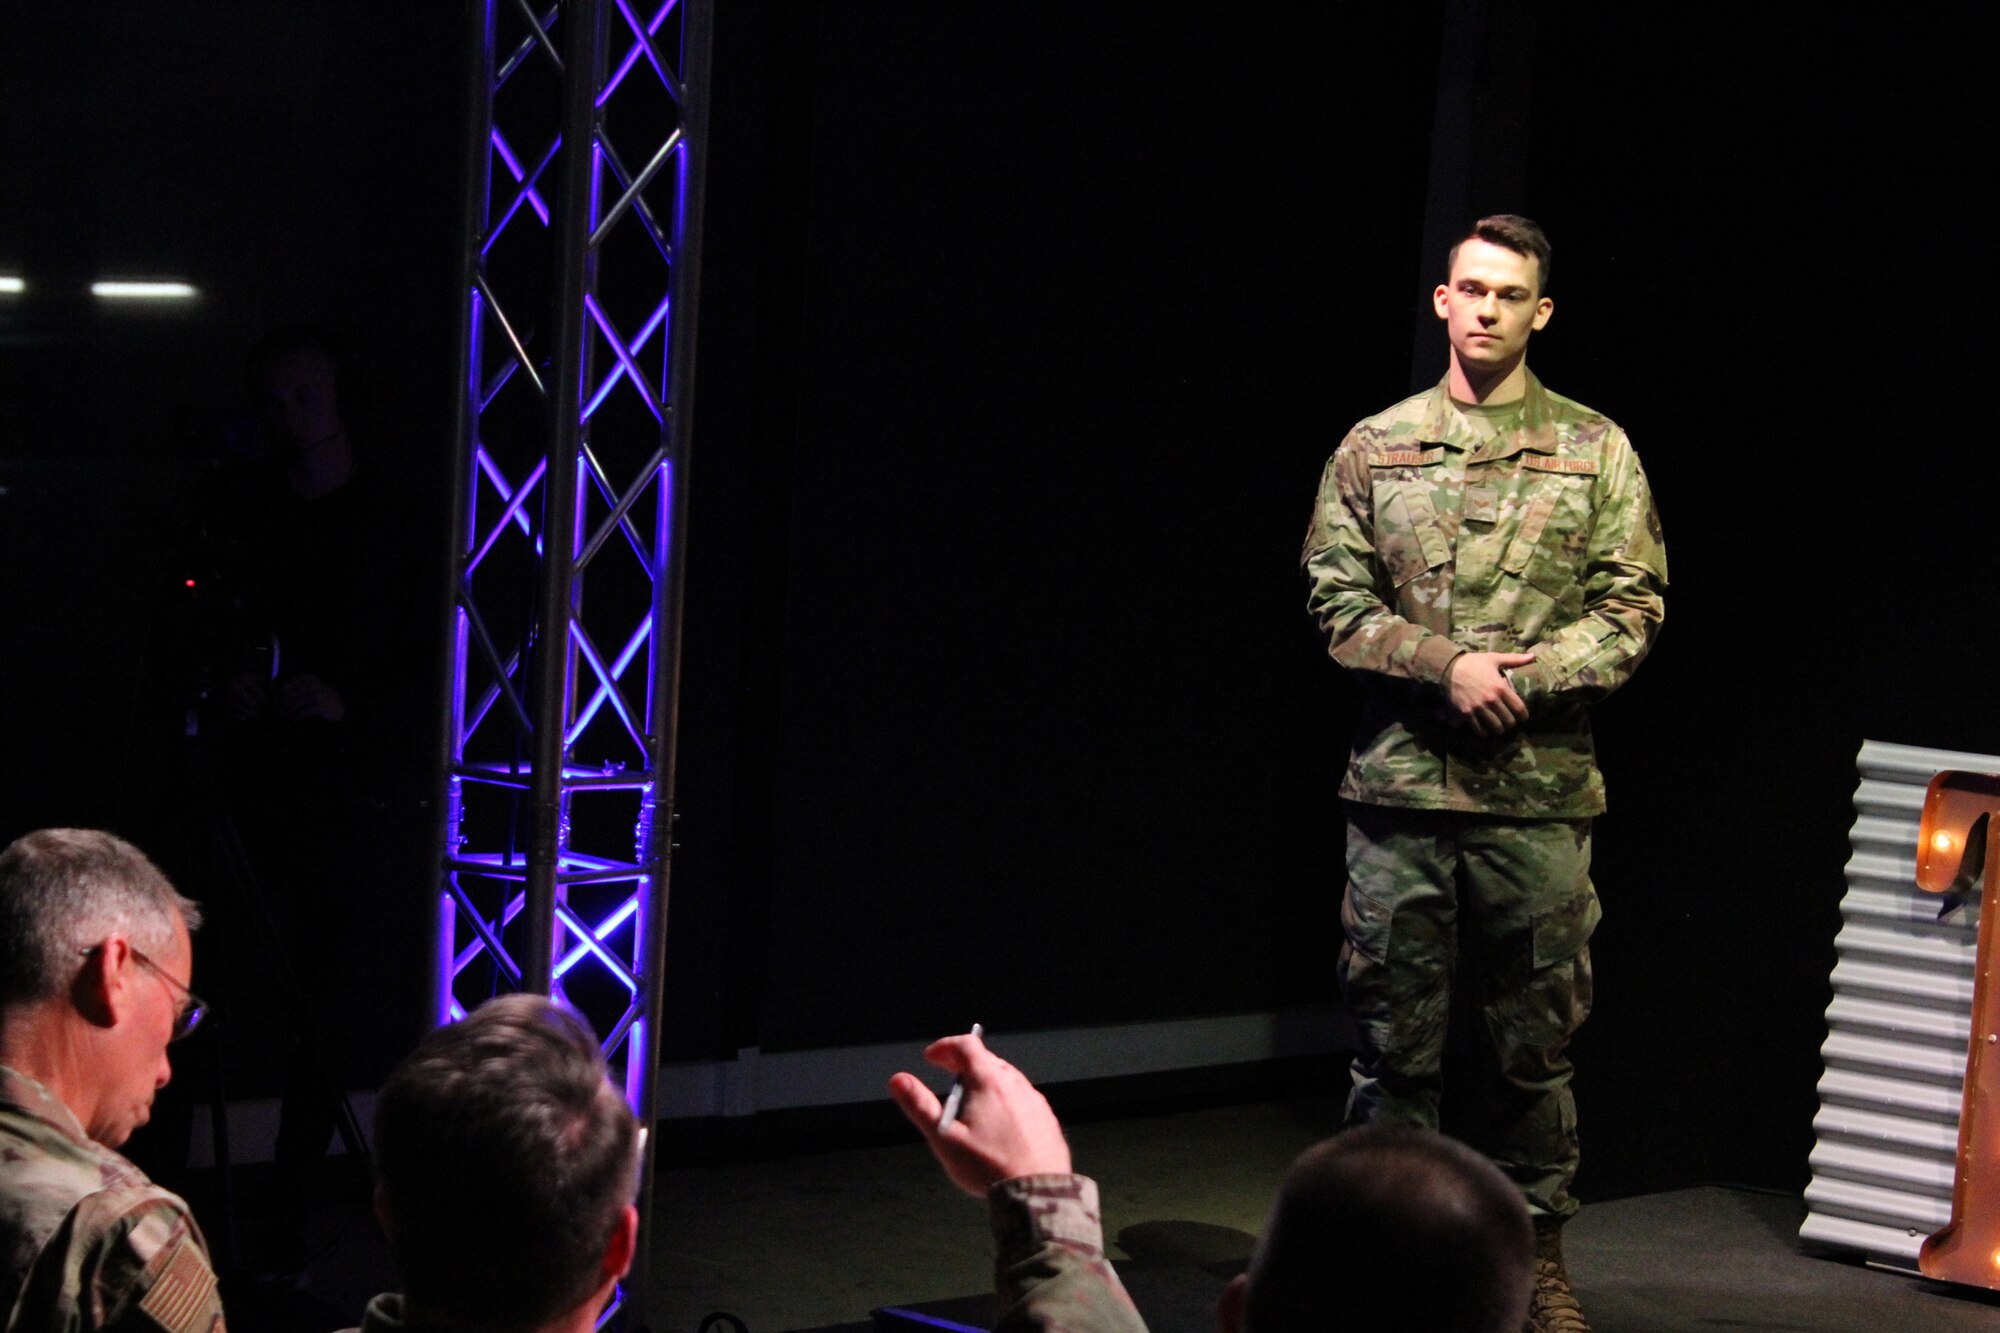 Senior Airman Tyler Strauser presents an idea for using augmented reality glasses to rapidly and efficiently locate utilities to senior leaders during the 2020 Air Force Installation and Mission Support Center Innovation Rodeo, Feb. 7, 2020, in San Antonio.